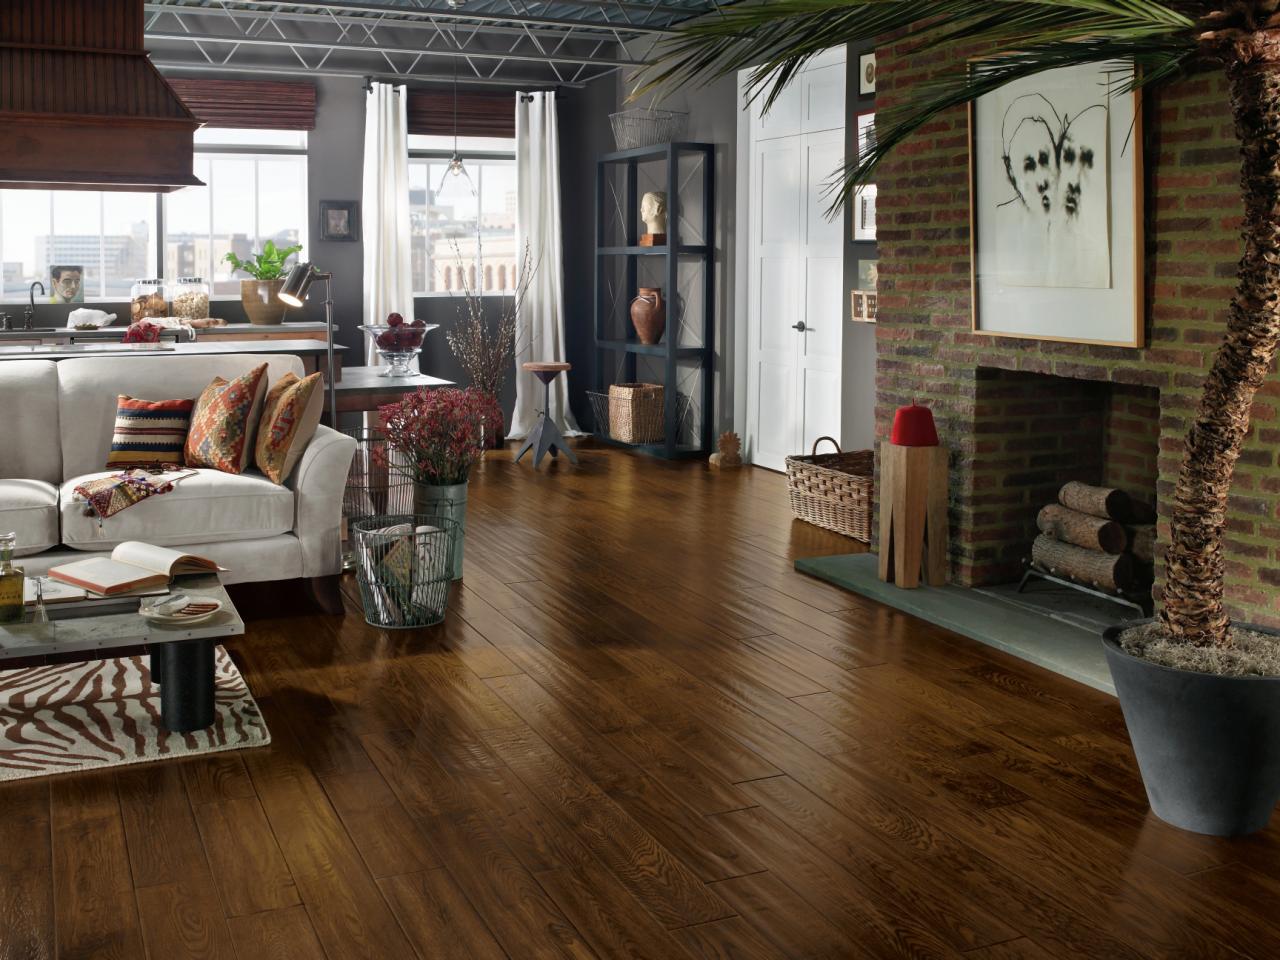 Top Living Room Flooring Options, What Is The Best Wood Flooring For Living Room